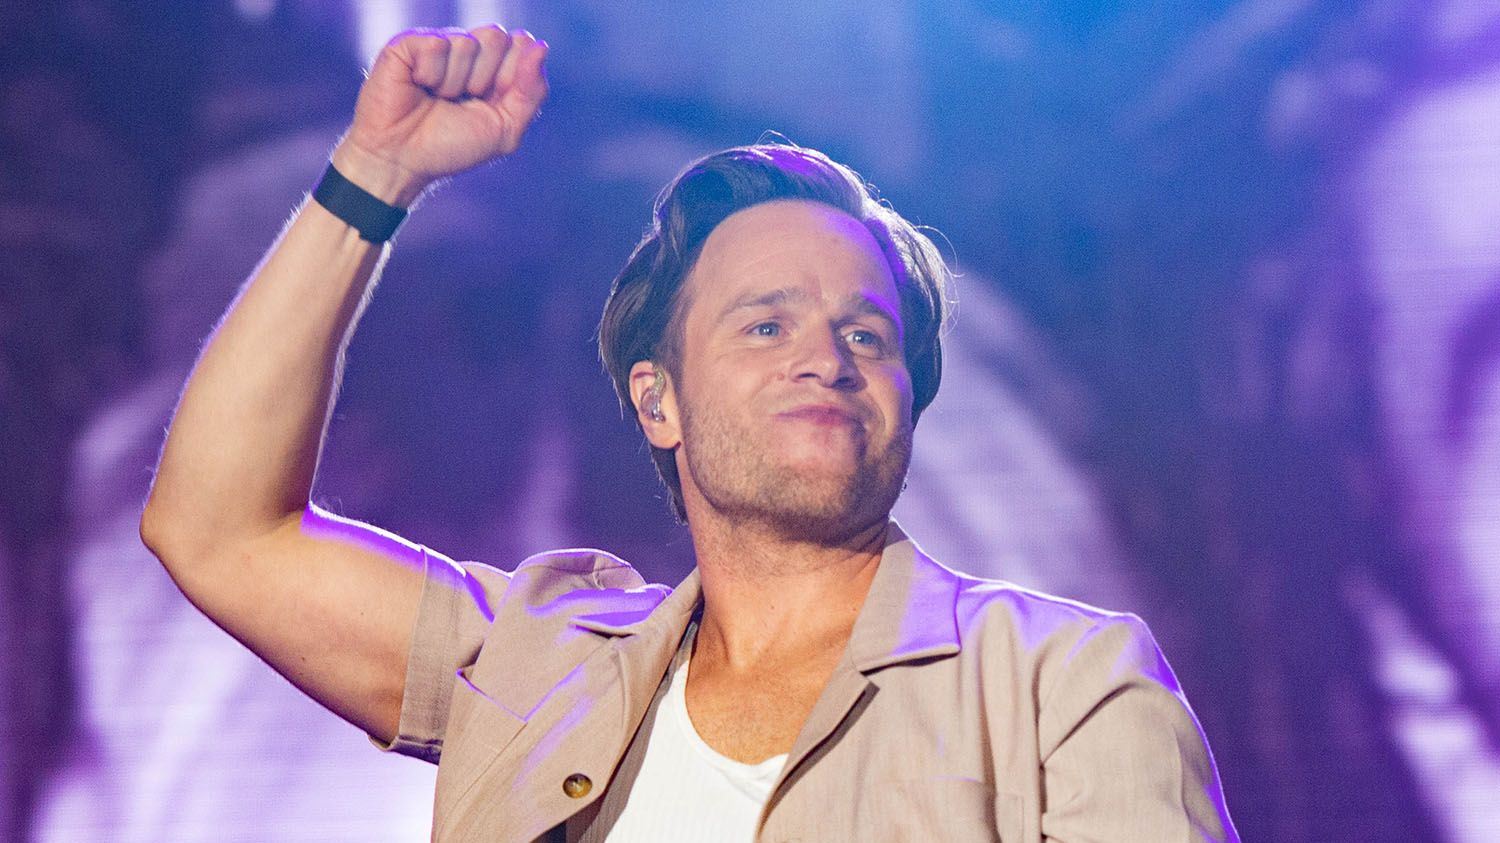 Olly Murs Facts About The Singer As He